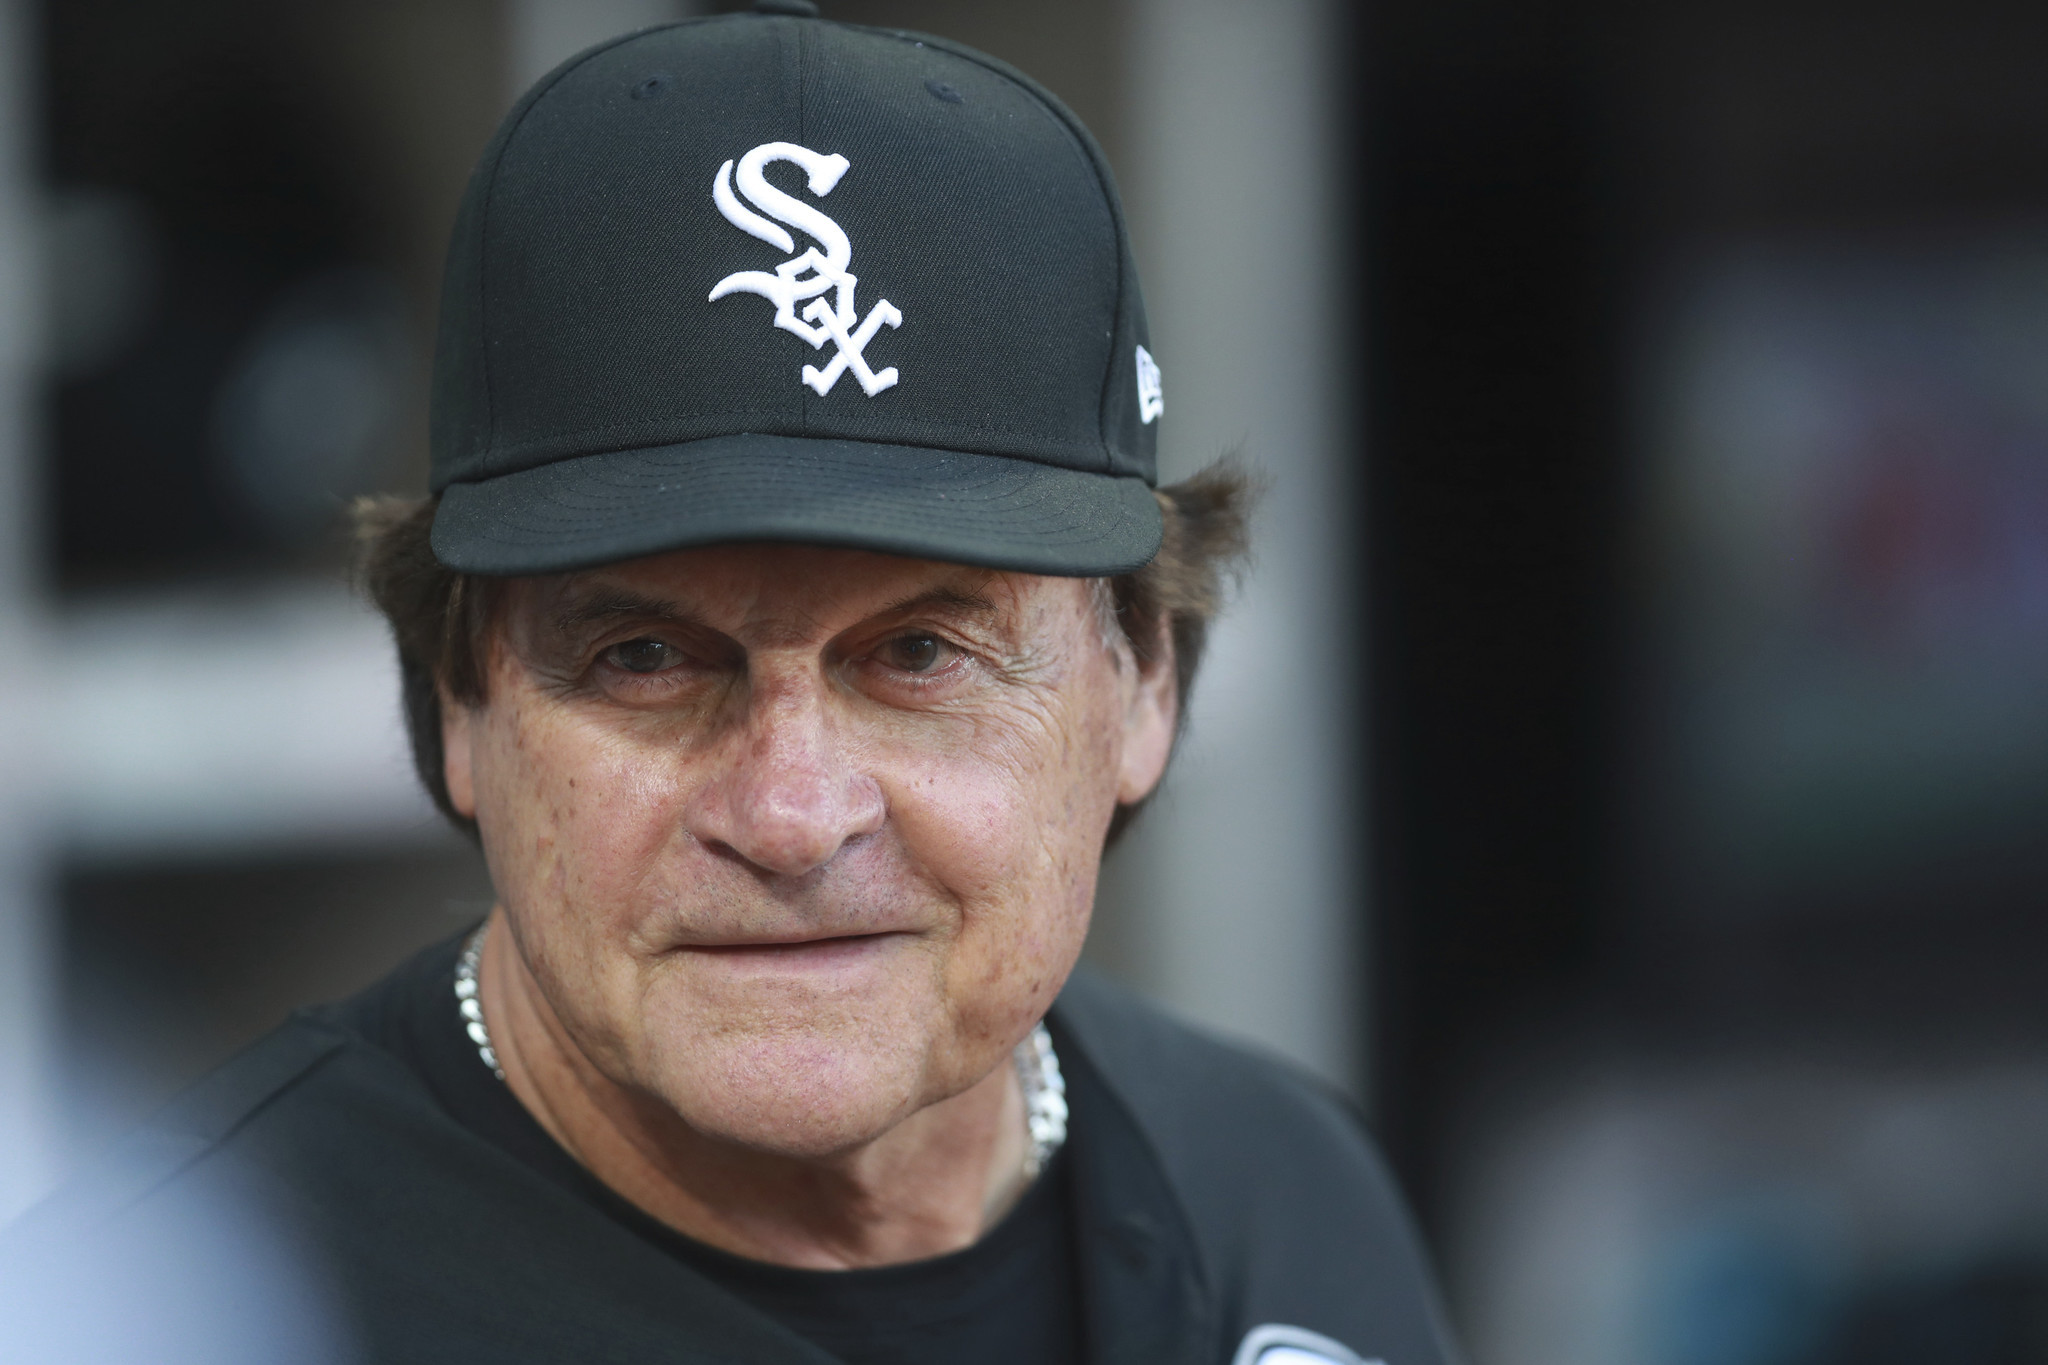 White Sox manager, Tampa native Tony La Russa out indefinitely